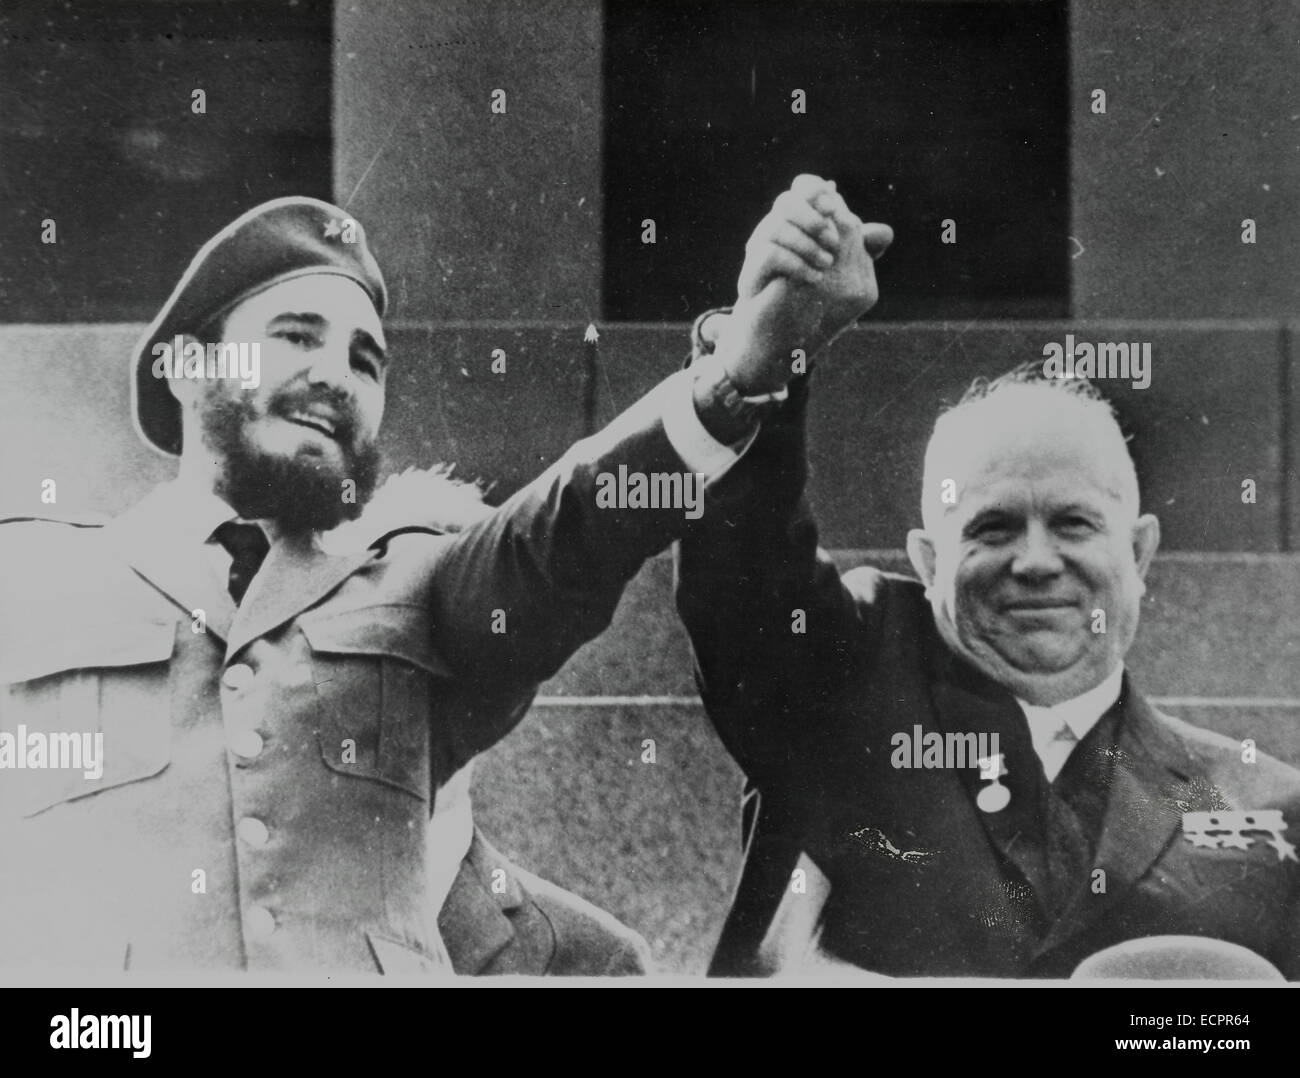 The US and Cuba announced an agreement between the two countries that will be a first step toward normalizing relations. PICTURED: Feb 02, 1961 - Havana, Cuba - FIDEL ALEJANDRO CASTRO RUIZ (born August 13, 1926) has been the ruler of Cuba since 1959, when, leading the 26th of July Movement, he overthrew the regime of Fulgencio Batista. In the years that followed he oversaw the transformation of Cuba into the first Communist state in the Western Hemisphere. PICTURED: NIKITA KHRUSHCHEV and FIDEL CASTRO holds while watching the parade. © KEYSTONE Pictures USA/ZUMAPRESS.com/Alamy Live News Stock Photo